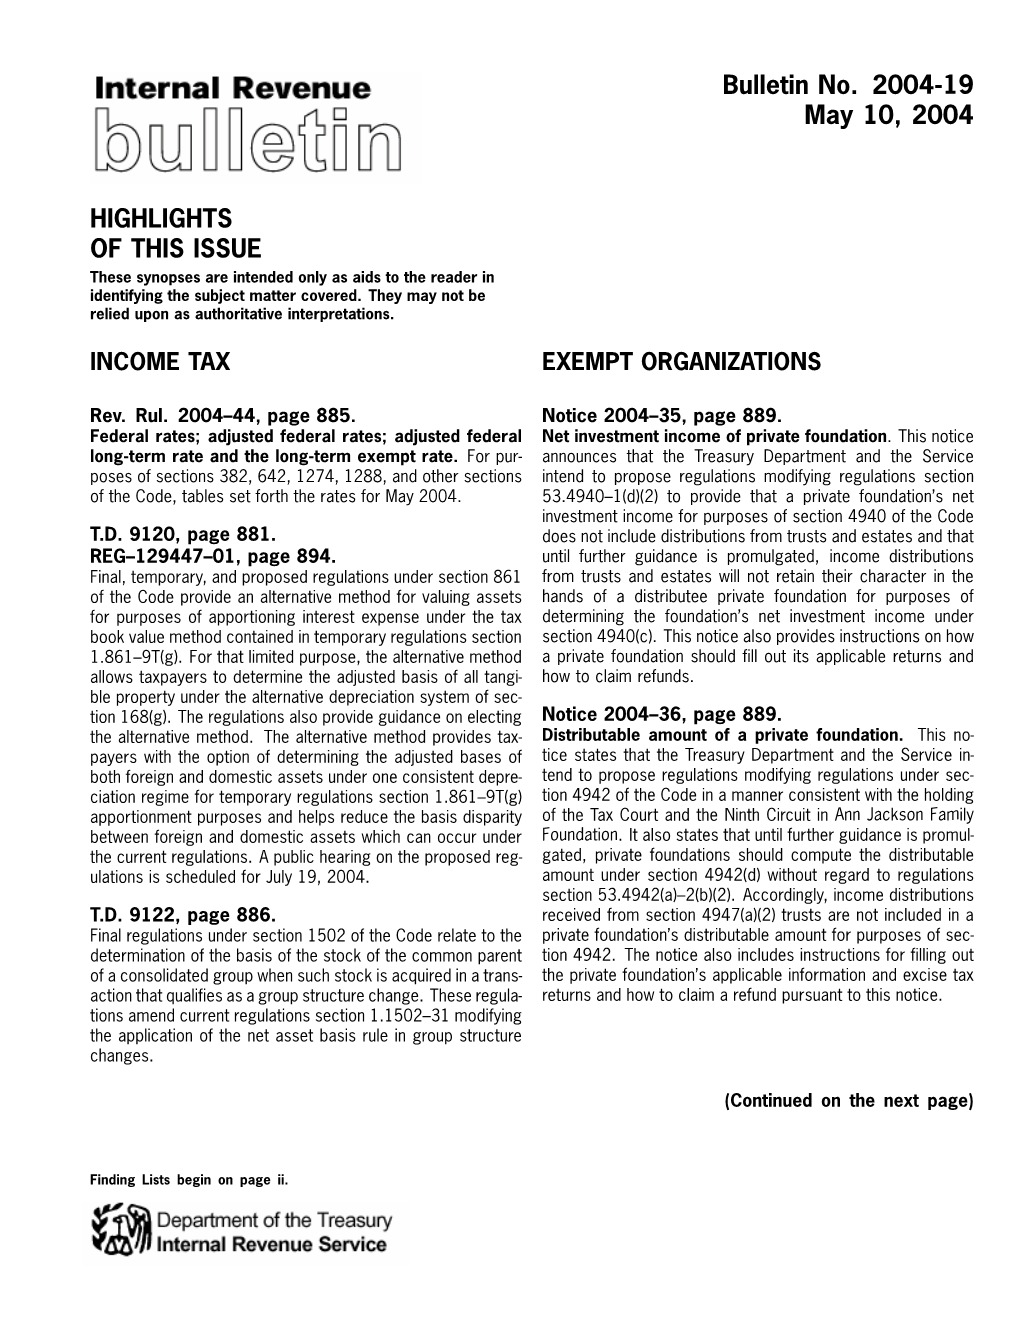 Bulletin No. 2004-19 May 10, 2004 HIGHLIGHTS of THIS ISSUE